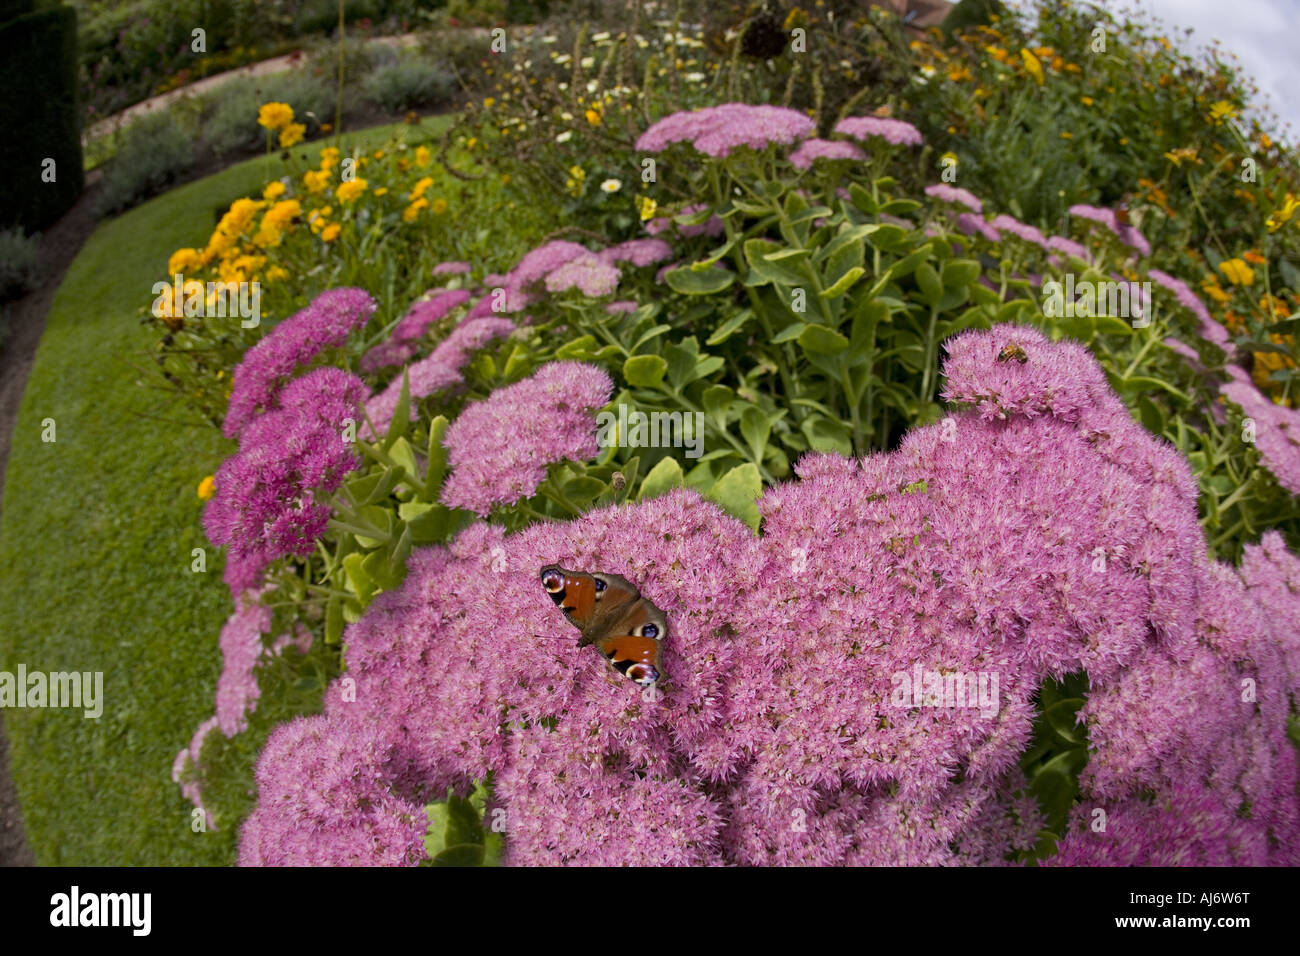 Peacock Butterfly Inachis io feeding on ice plant flowers Stock Photo